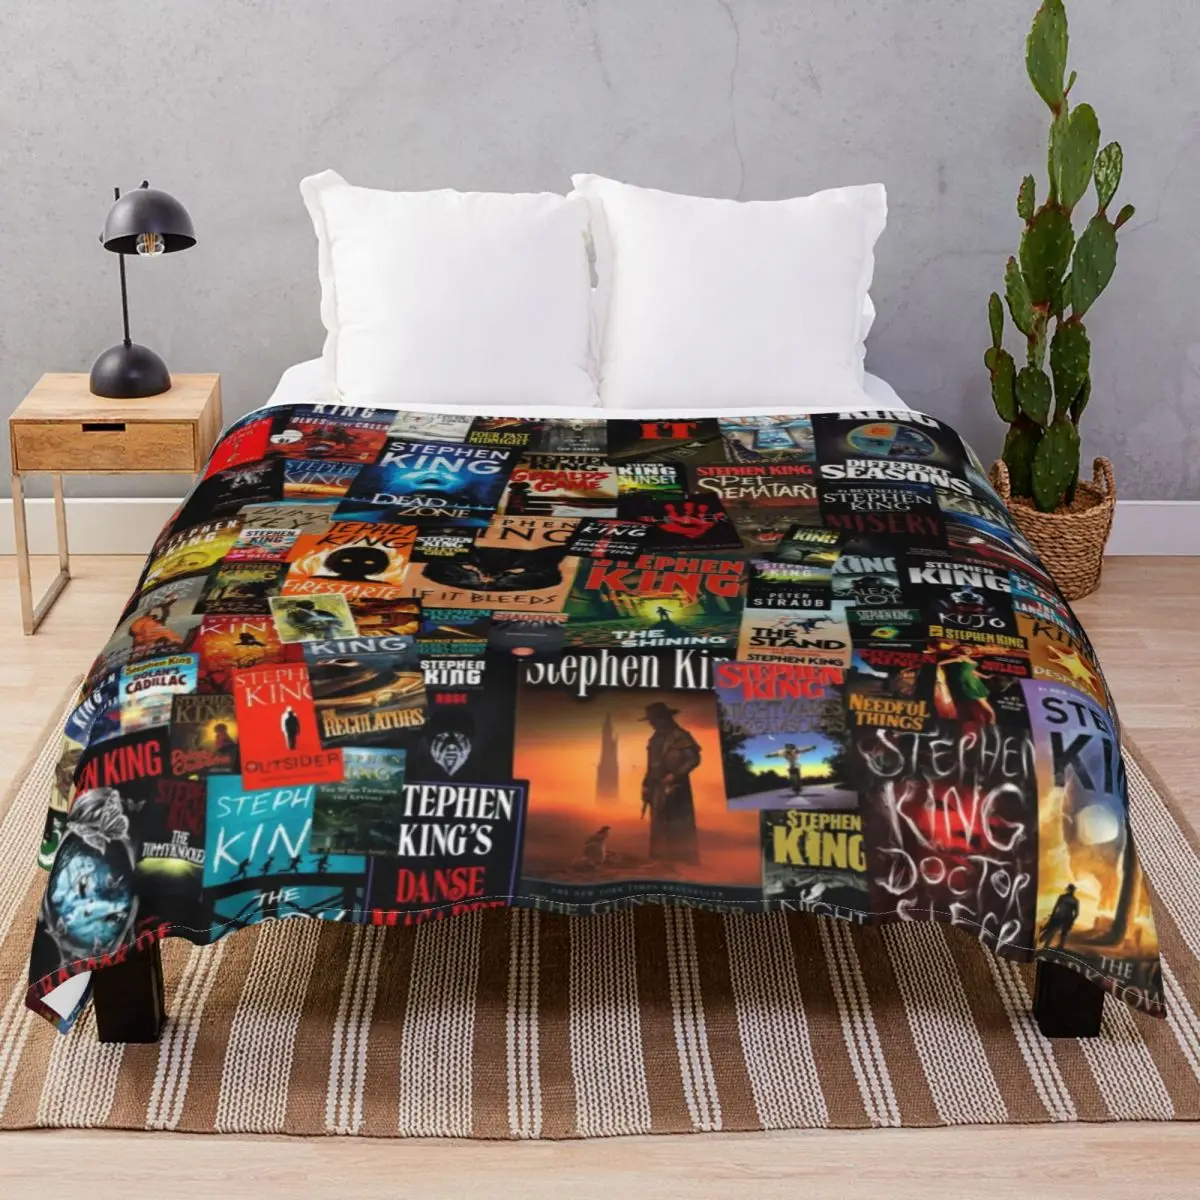 Stephen King Books Blankets Flannel Decoration Lightweight Thin Throw Blanket for Bedding Home Couch Travel Cinema